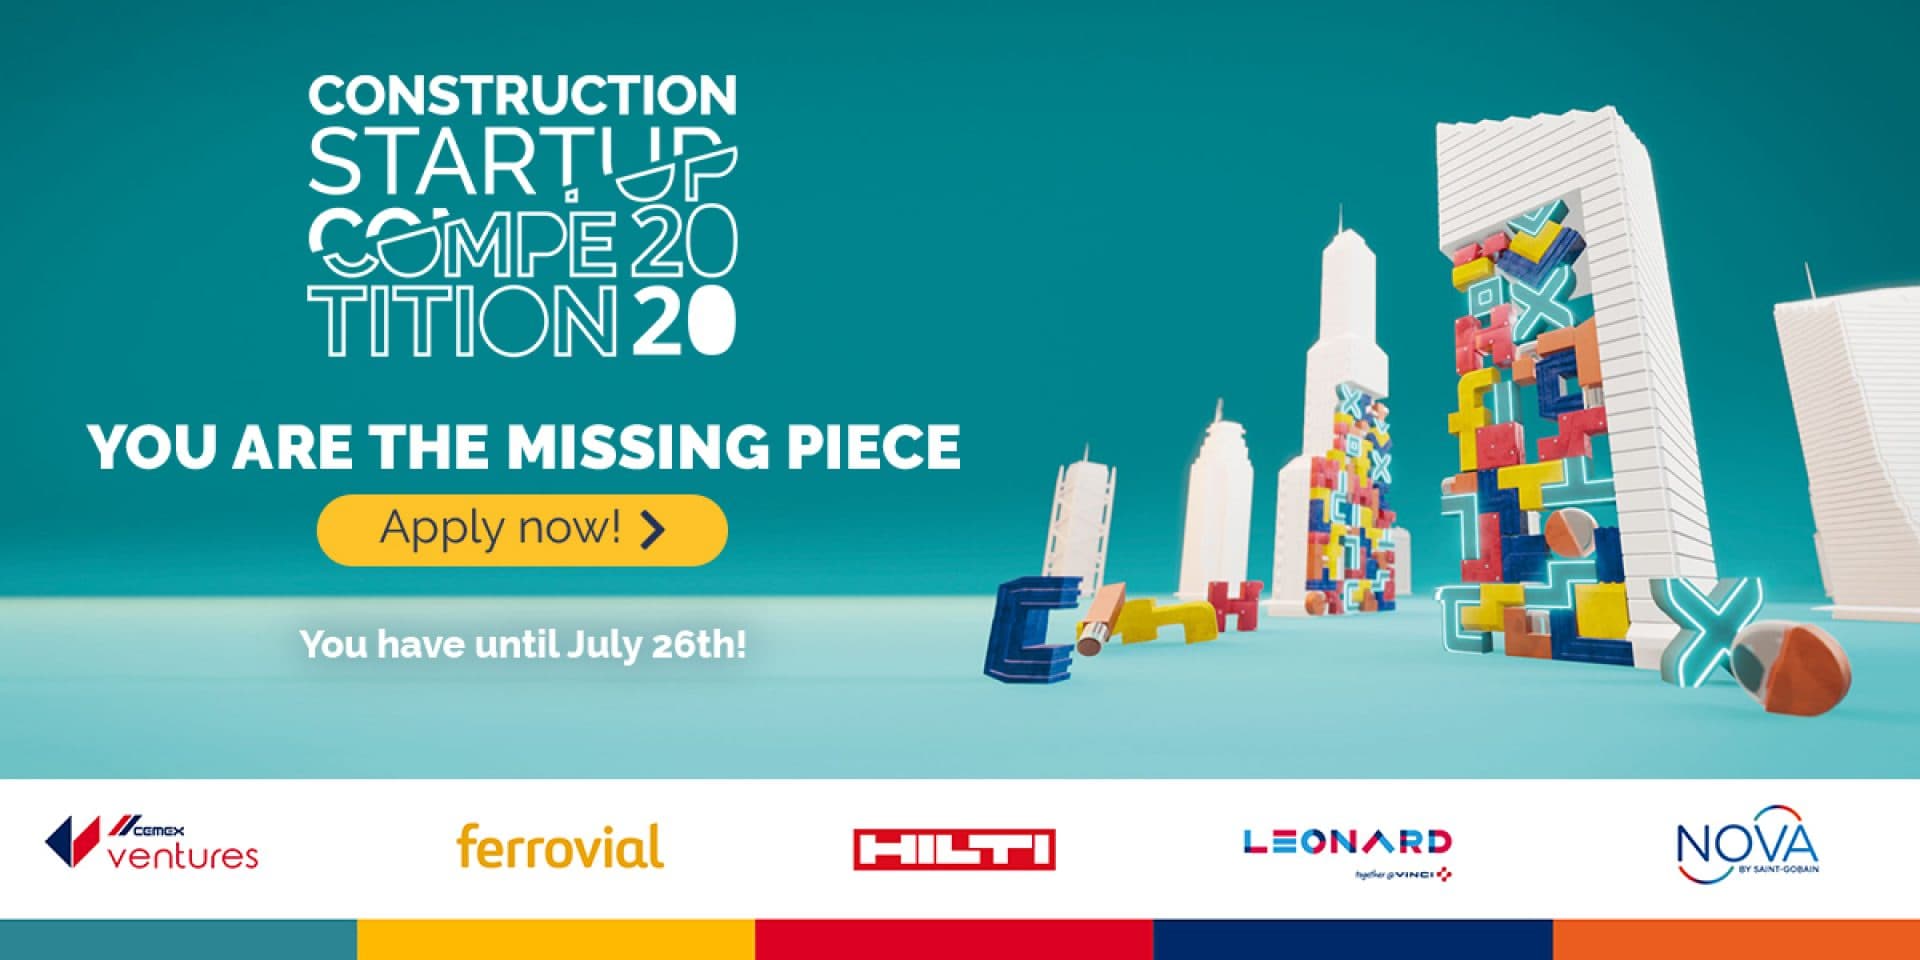 Hilti among industry leaders to launch 2020 construction startup competition 